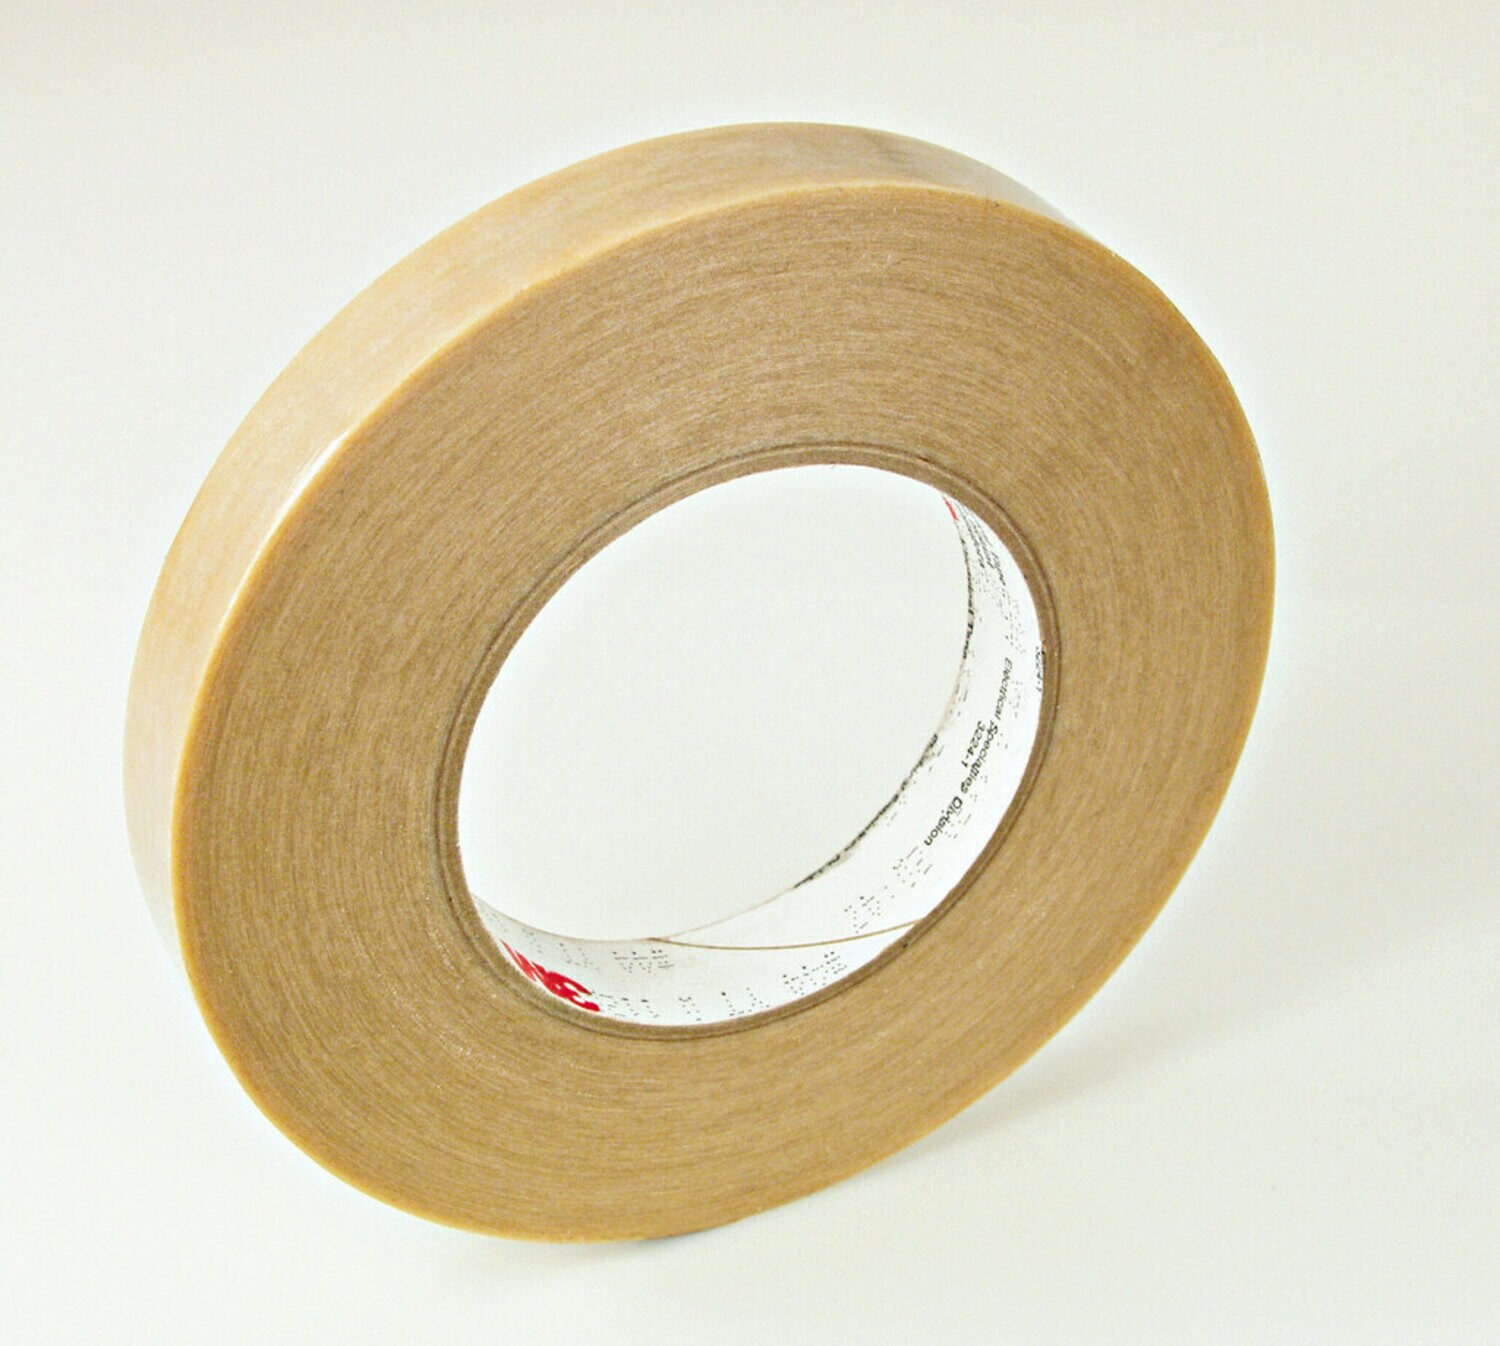 7010293656 - 3M Composite Film Electrical Tape 44, 1-1/4 in x 90 yd, 3 in Plastic
Core